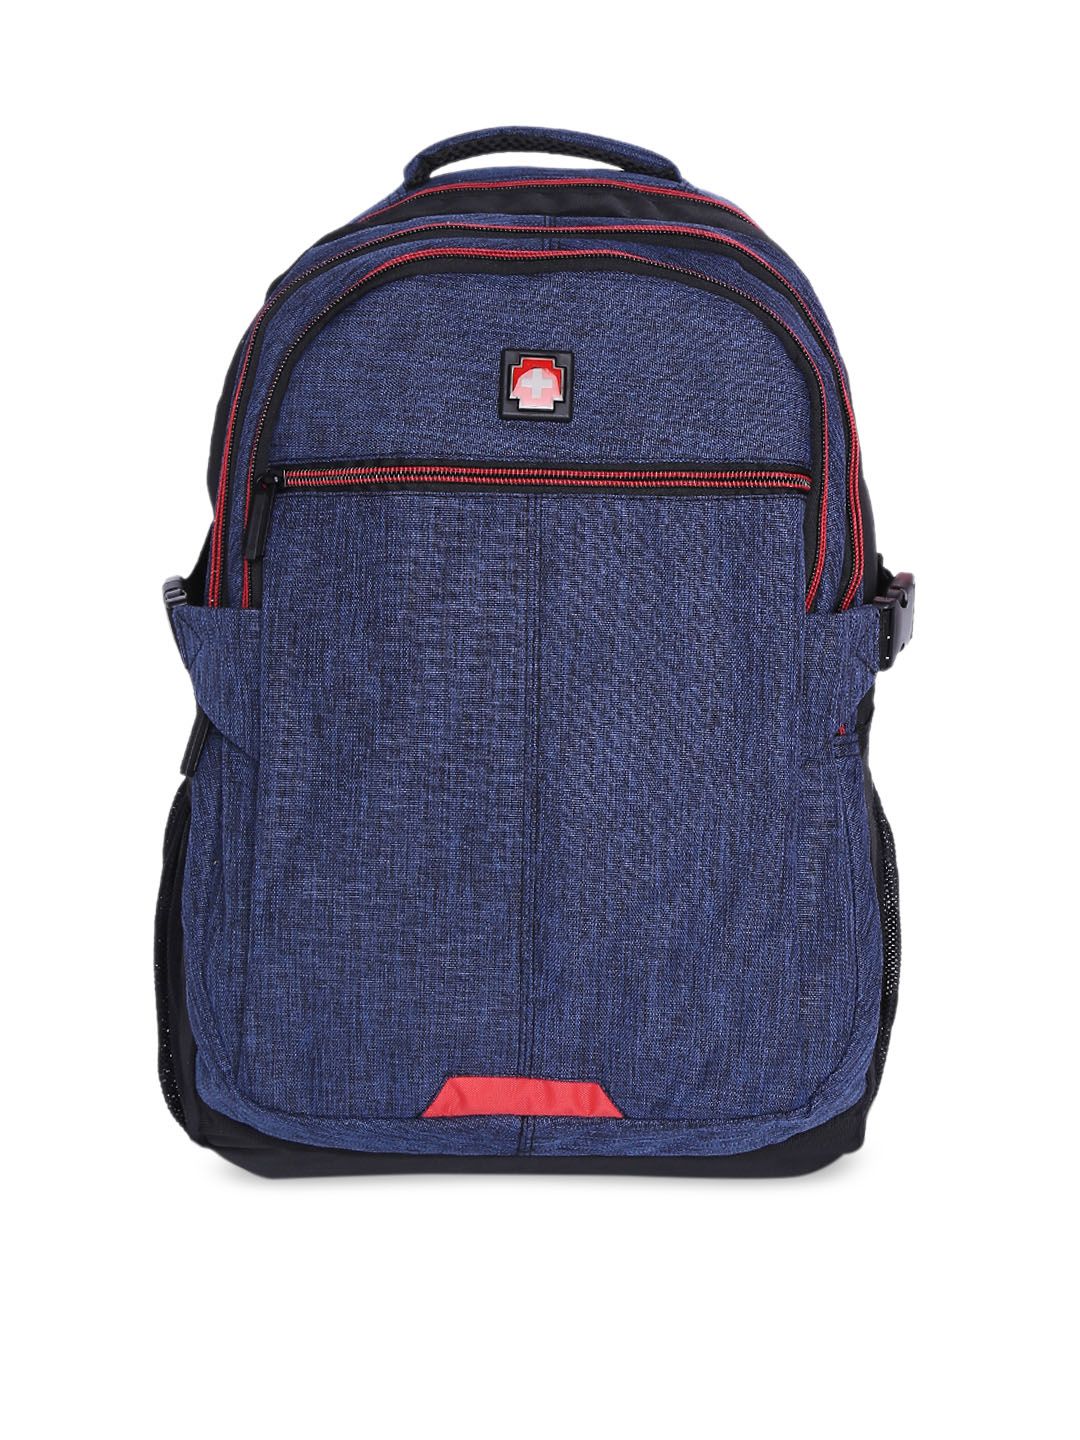 SWISS BRAND Unisex Navy Blue Solid Backpack Price in India